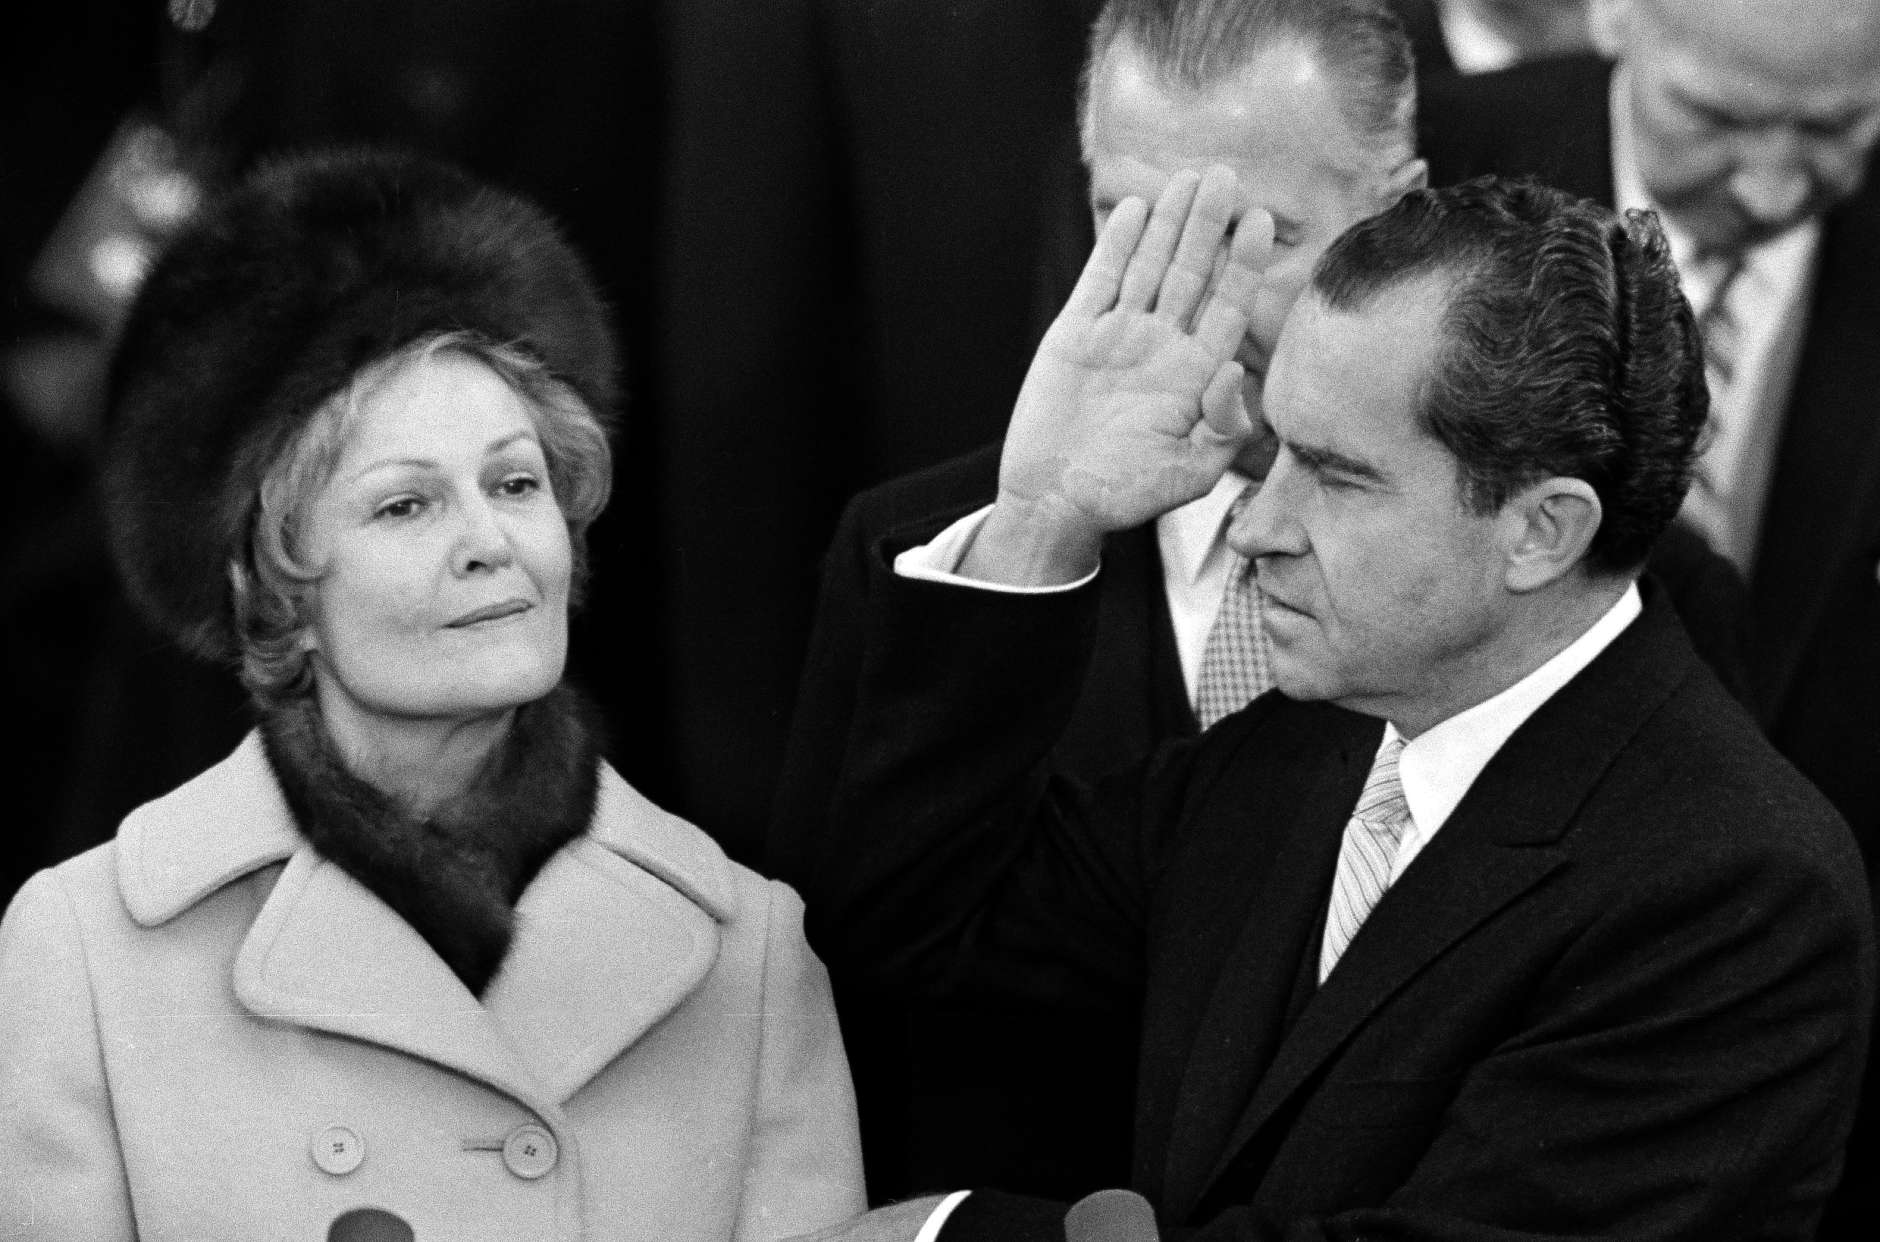 Richard Nixon holds his left hand on two family bibles and raises his right as he takes the oath as 37th President of the United States on the Capitol steps in Washington, D.C., Jan. 20, 1969. Behind his right hand is Vice President Spiro Agnew. Mrs. Pat Nixon holds the bibles. (AP Photo)